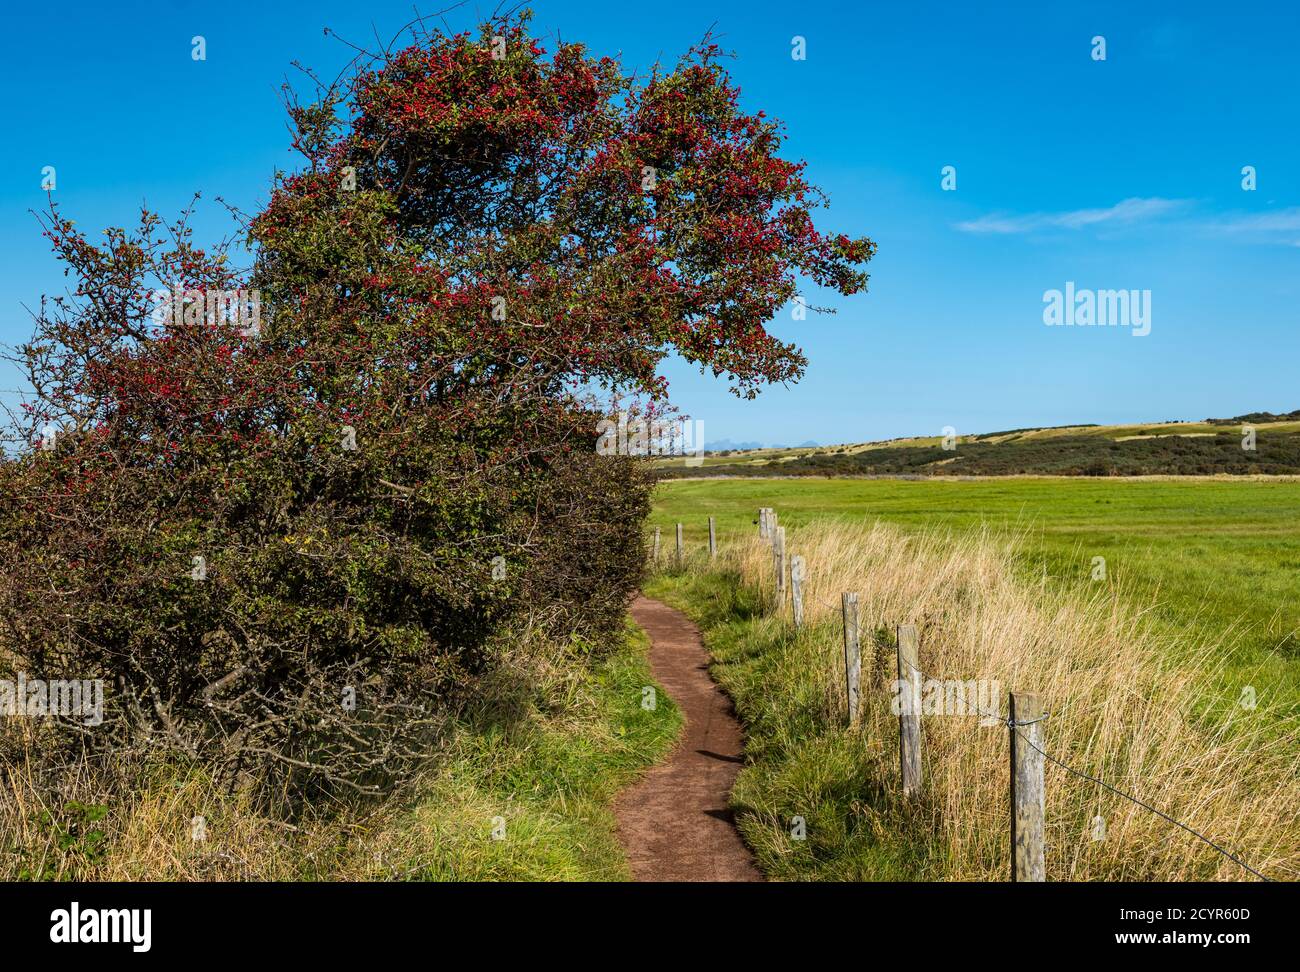 Aberlady Nature Reserve, East Lothian, Scotland, United Kingdom, 2nd October 2020. UK Weather: A beautiful sunny day. A hawthorn bush with red berries along the footpath Stock Photo